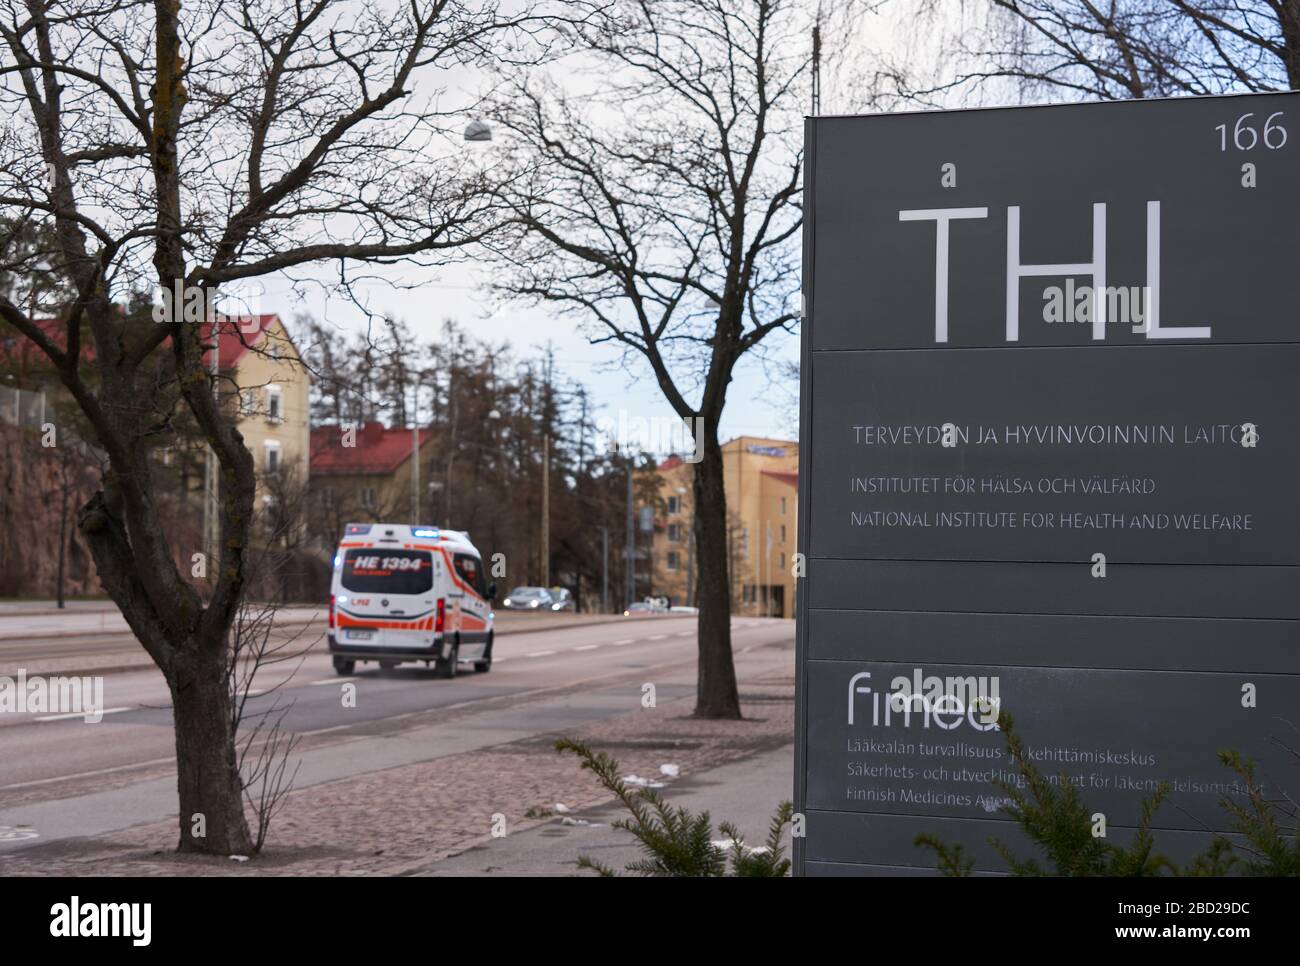 Helsinki, Finland - April 4, 2020: Outdoors sign of the (Finnish) National Institute for Health and Welfare (THL) with an ambulance passing on Mannerh Stock Photo